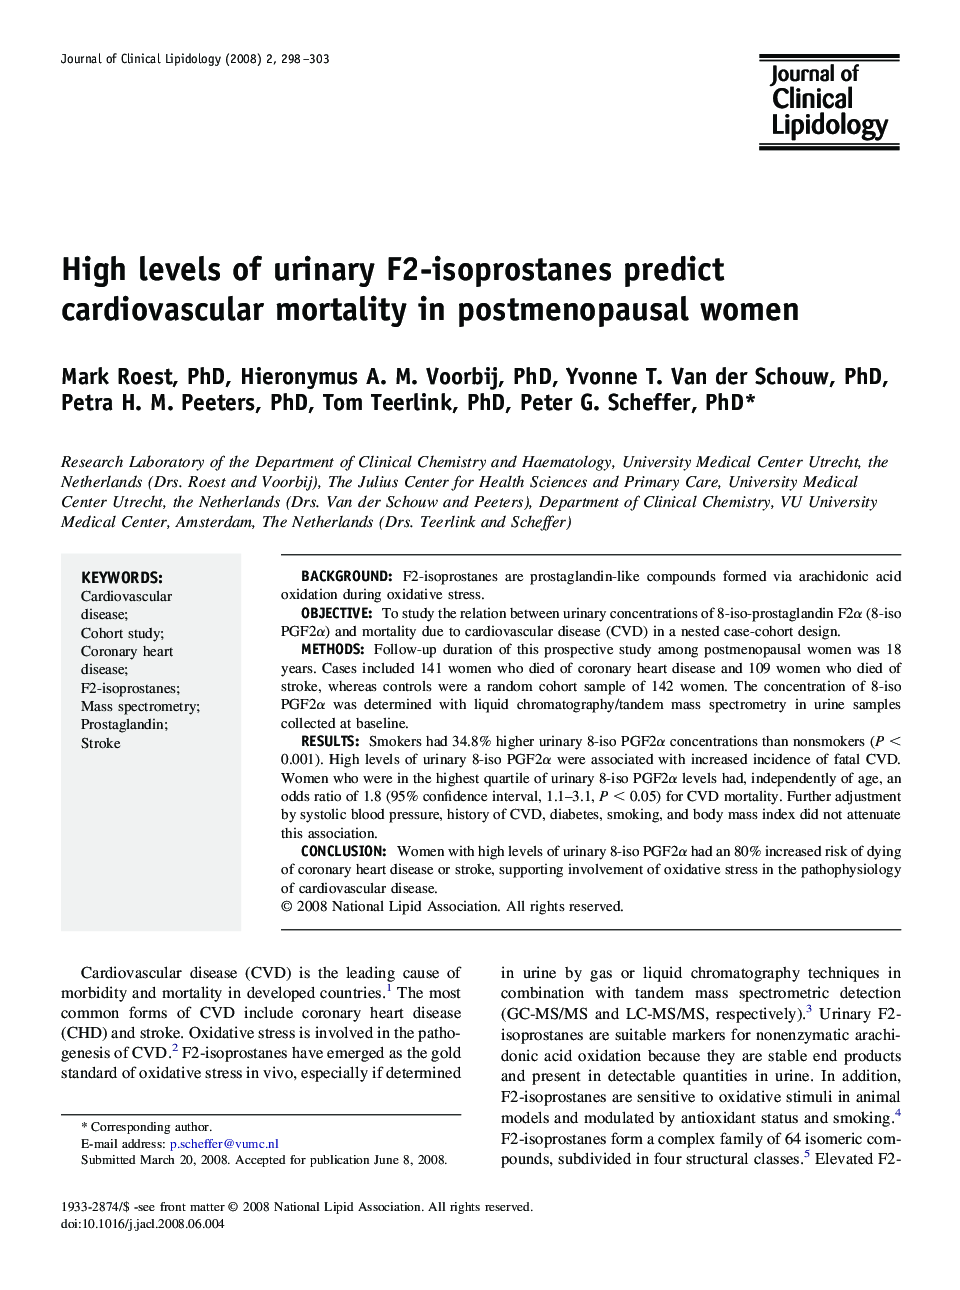 High levels of urinary F2-isoprostanes predict cardiovascular mortality in postmenopausal women